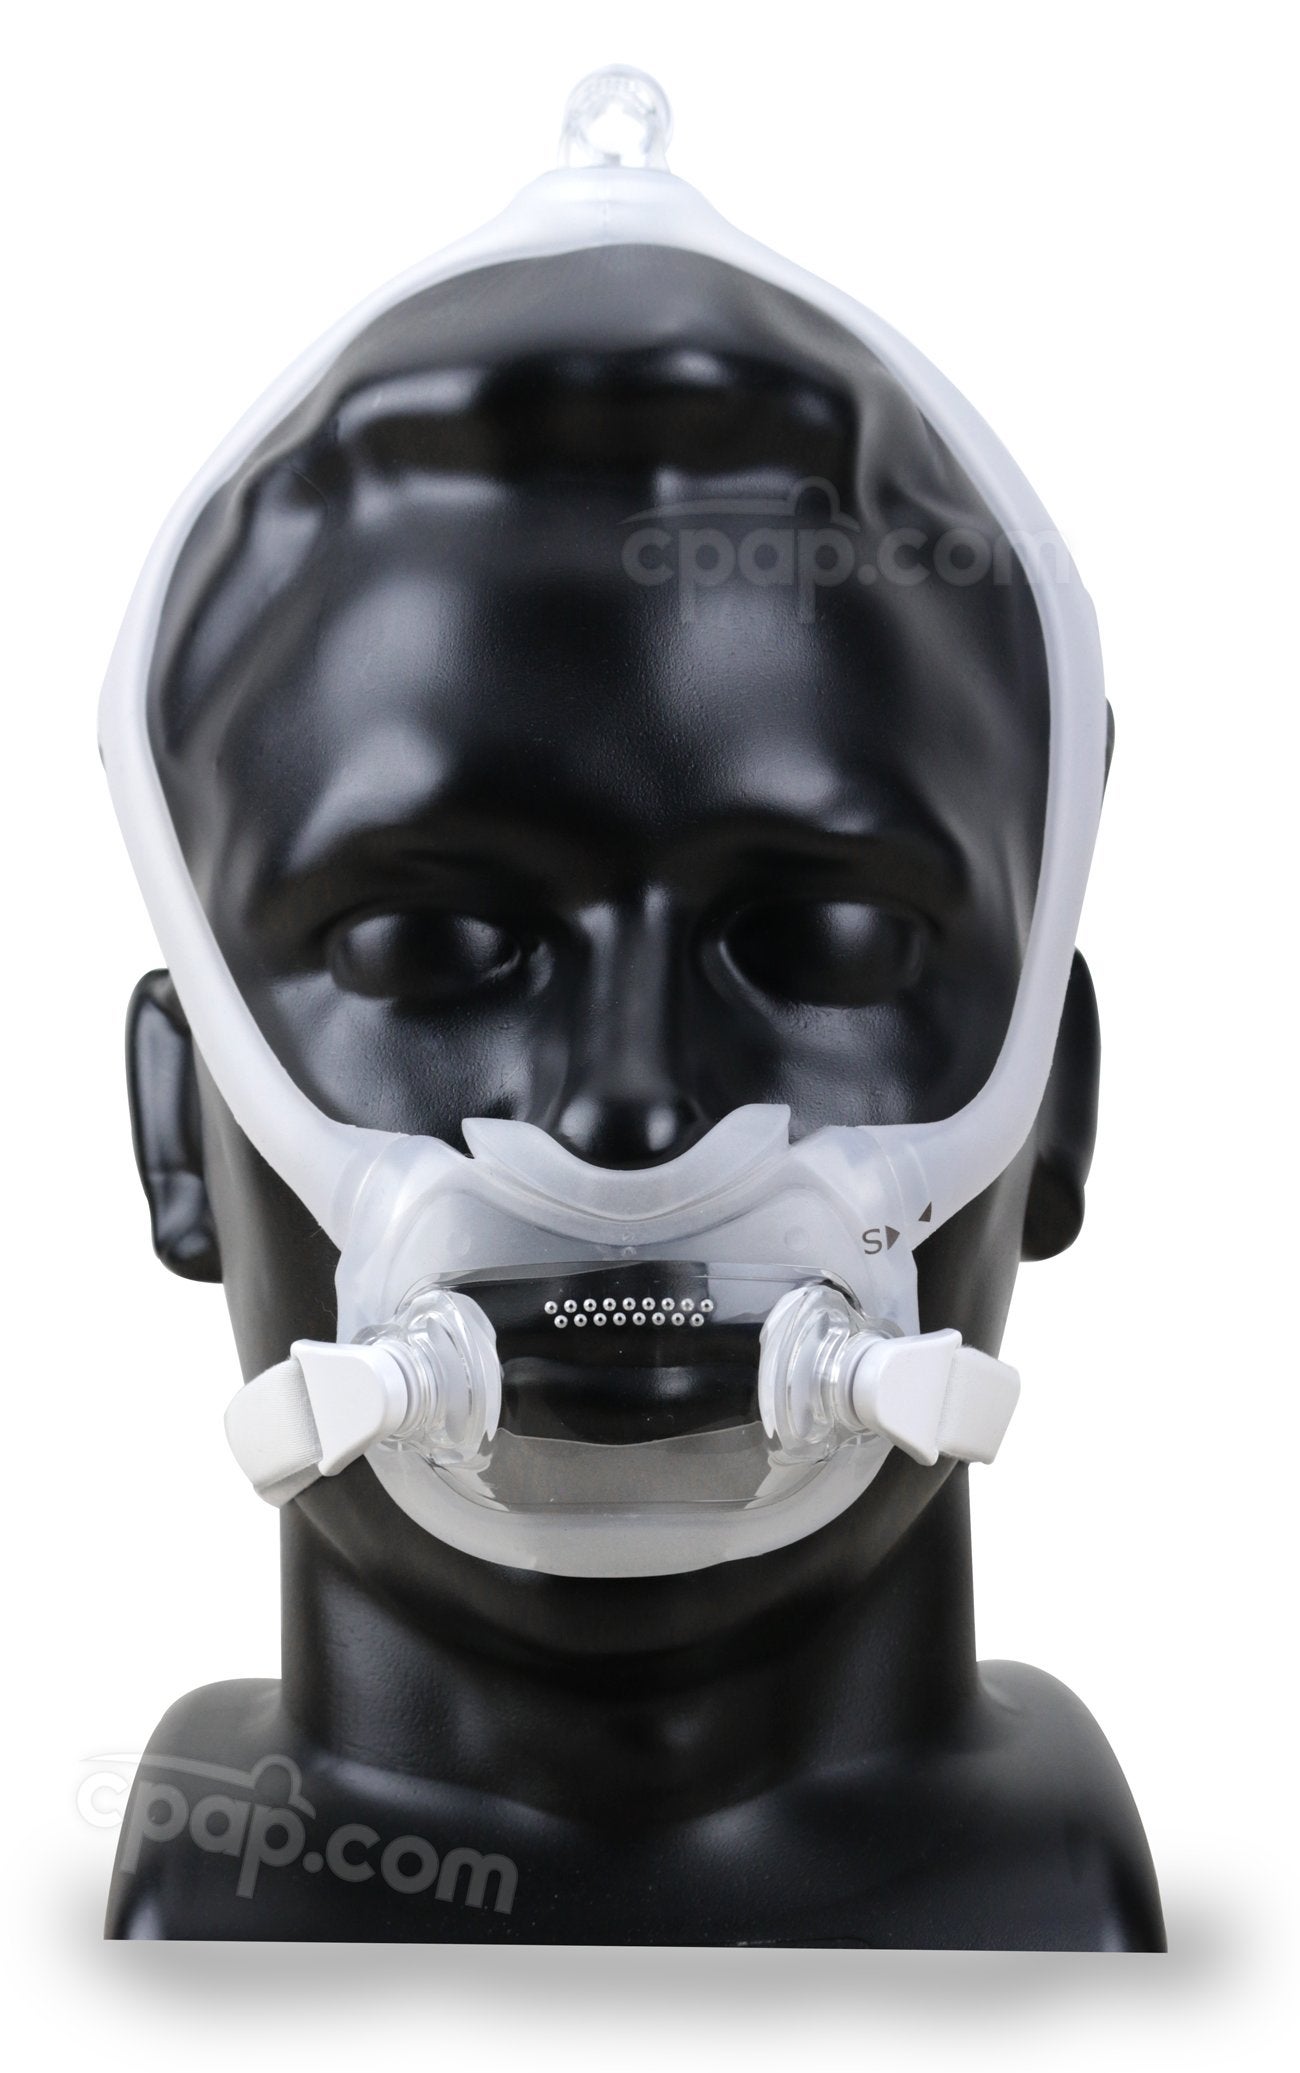 DreamWear Full Face CPAP Mask Fitpack By Philips